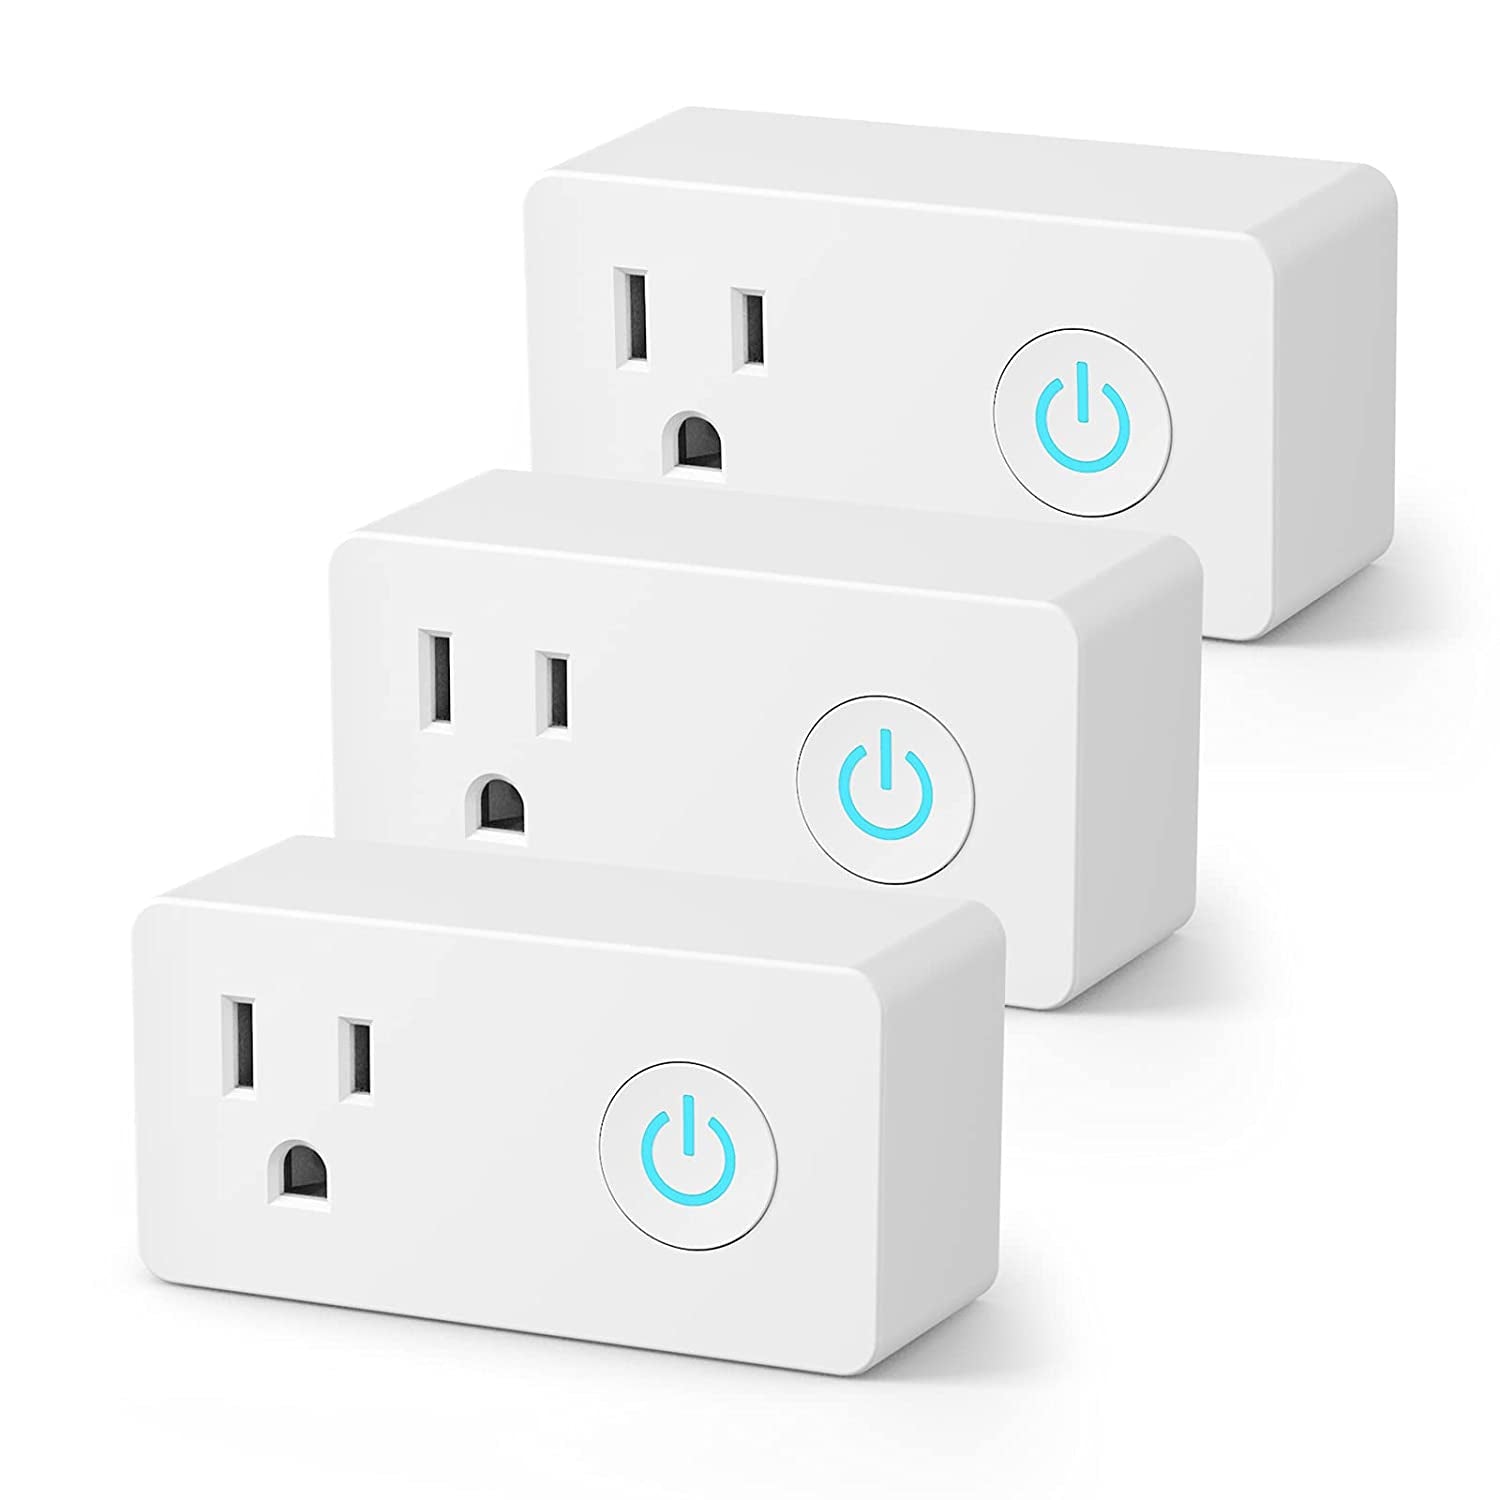 Wifi Heavy Duty Smart Plug Outlet, No Hub Required with Timer Function, White, Compatible with Alexa and Google Assistant, 2.4 Ghz Network Only (3 Pack)